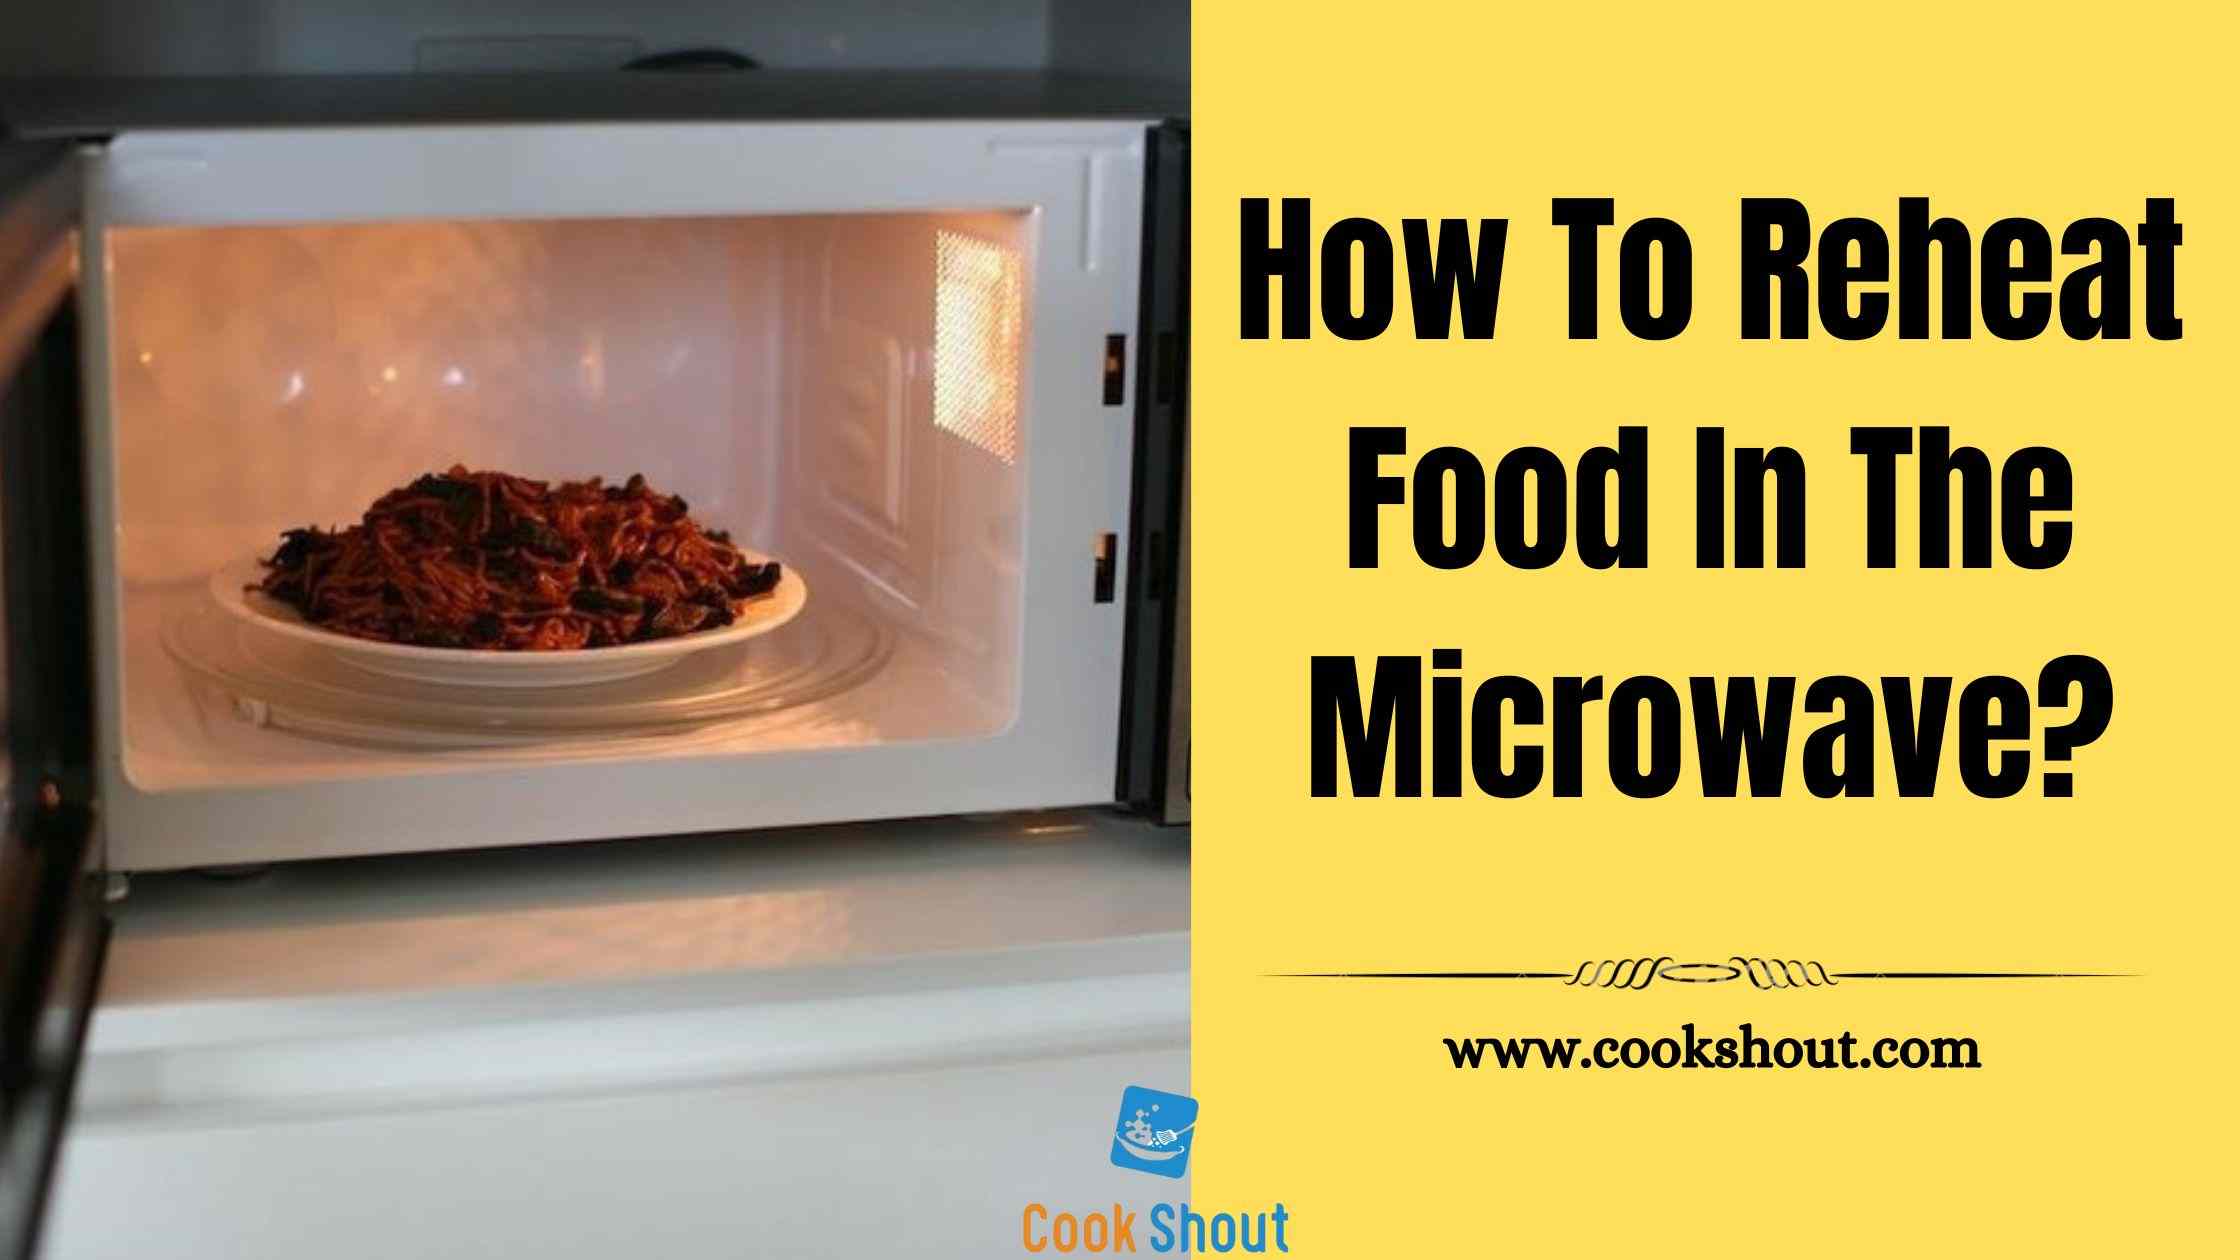 How To Reheat Food In The Microwave